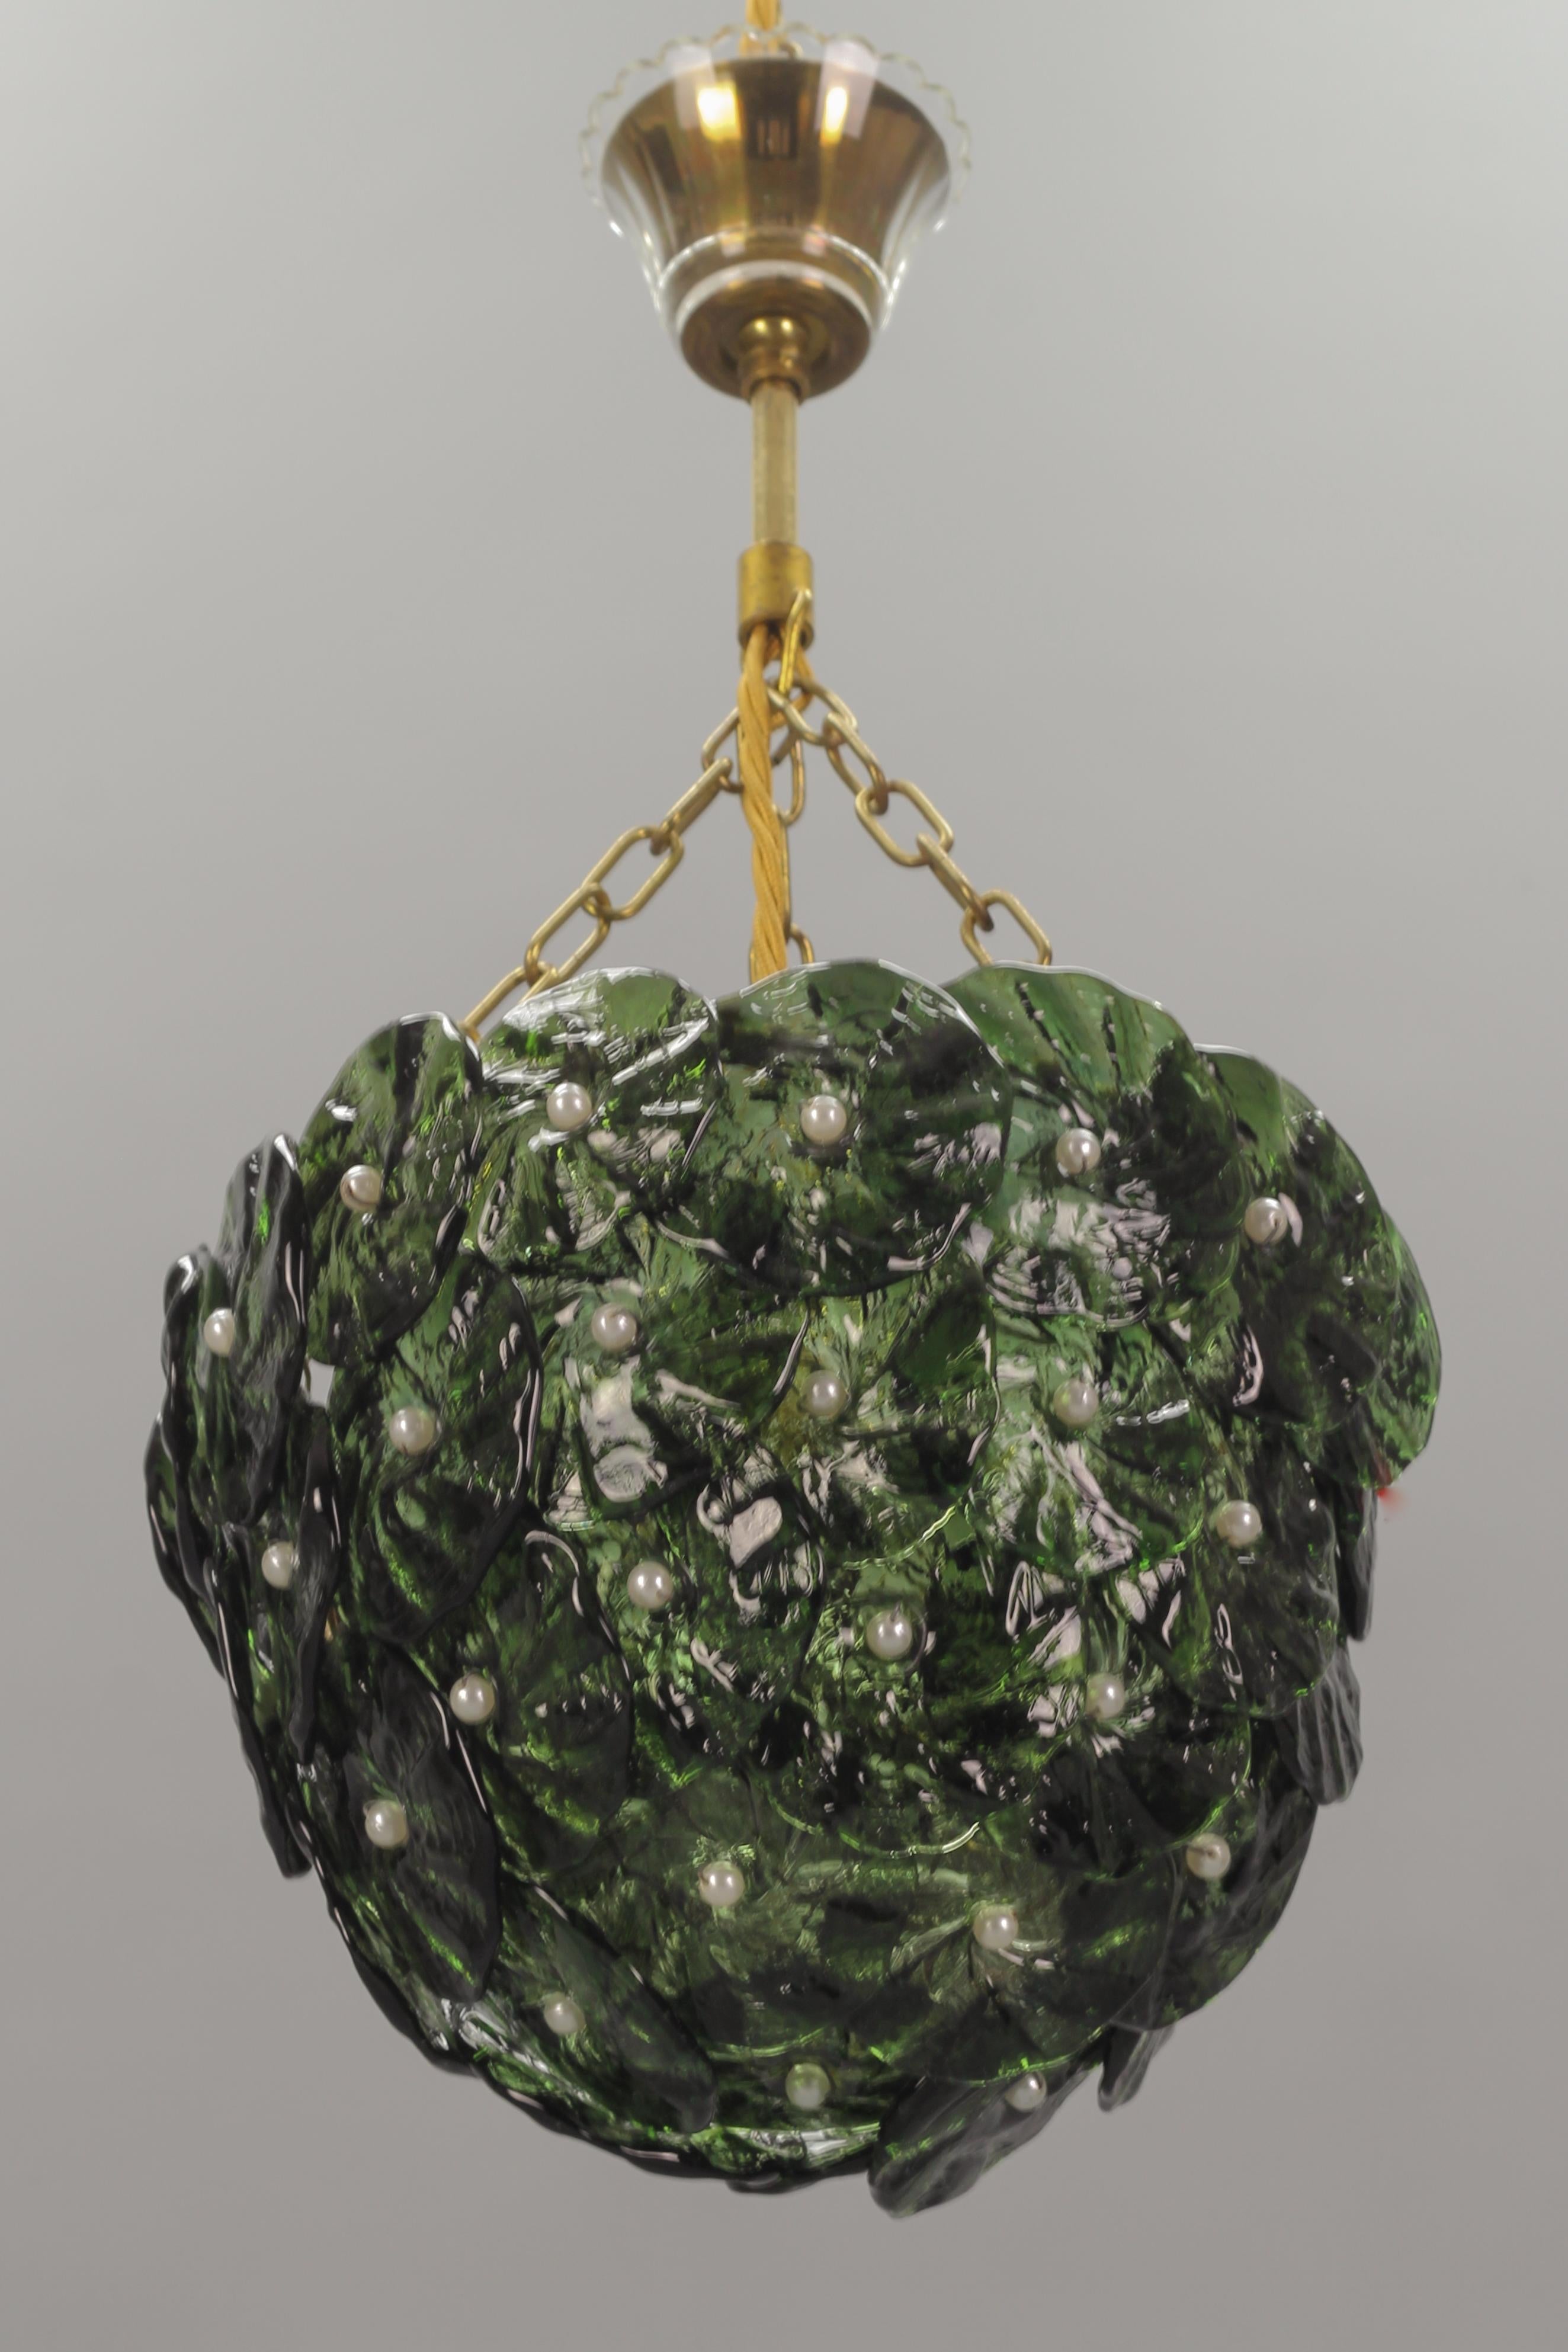 Italian Murano glass pendant light from the 1960s. This adorable and compact pendant light fixture features a lampshade made of green glass flowers and white glass pearls in the style of Barovier & Toso, hung at brass chains with one socket for an